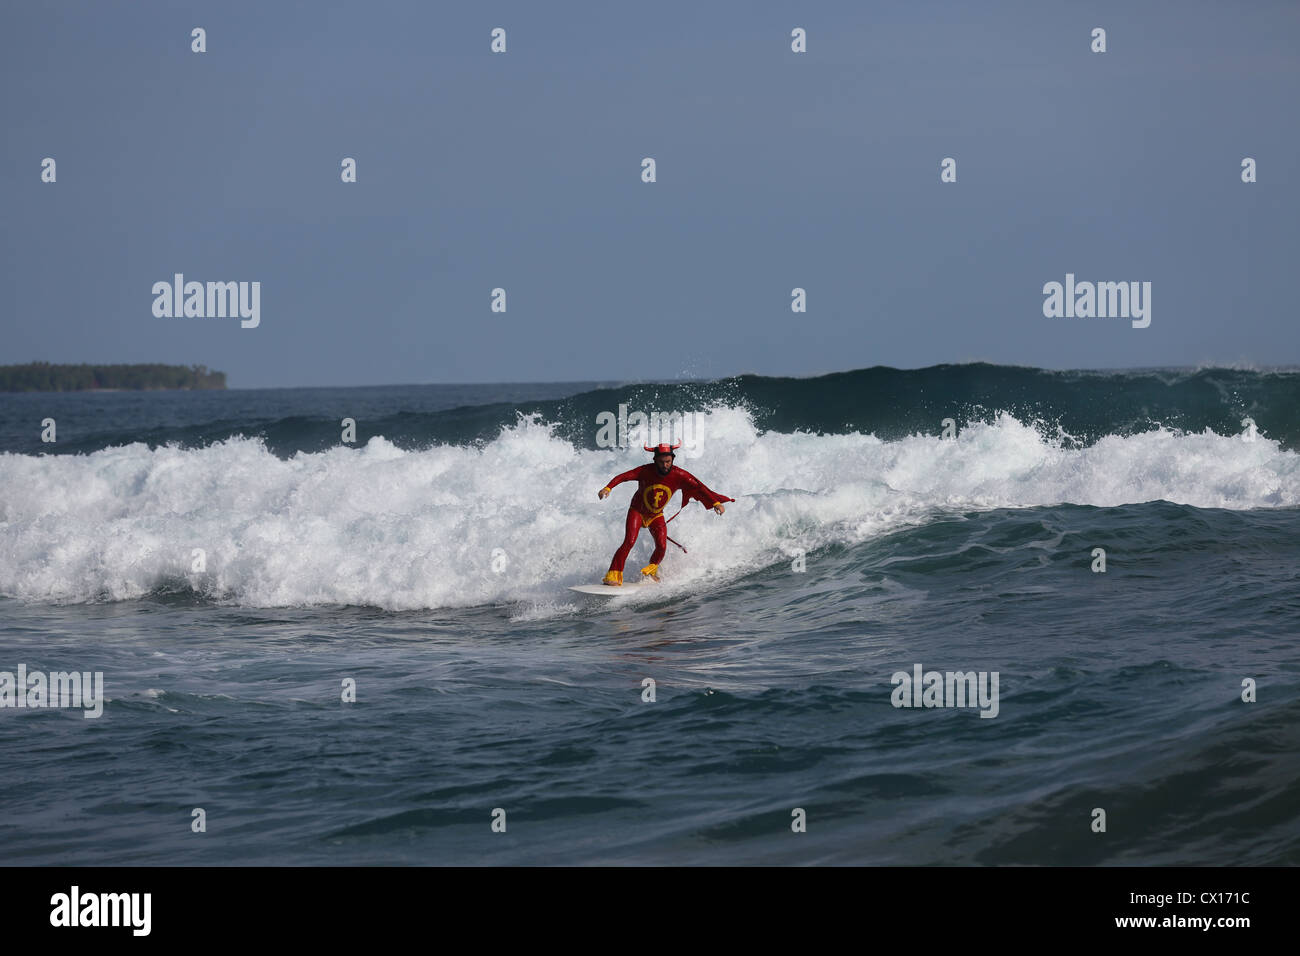 Surfer dressed in red devil super hero costume surfing a wave in Krui, South Sumatra. Stock Photo